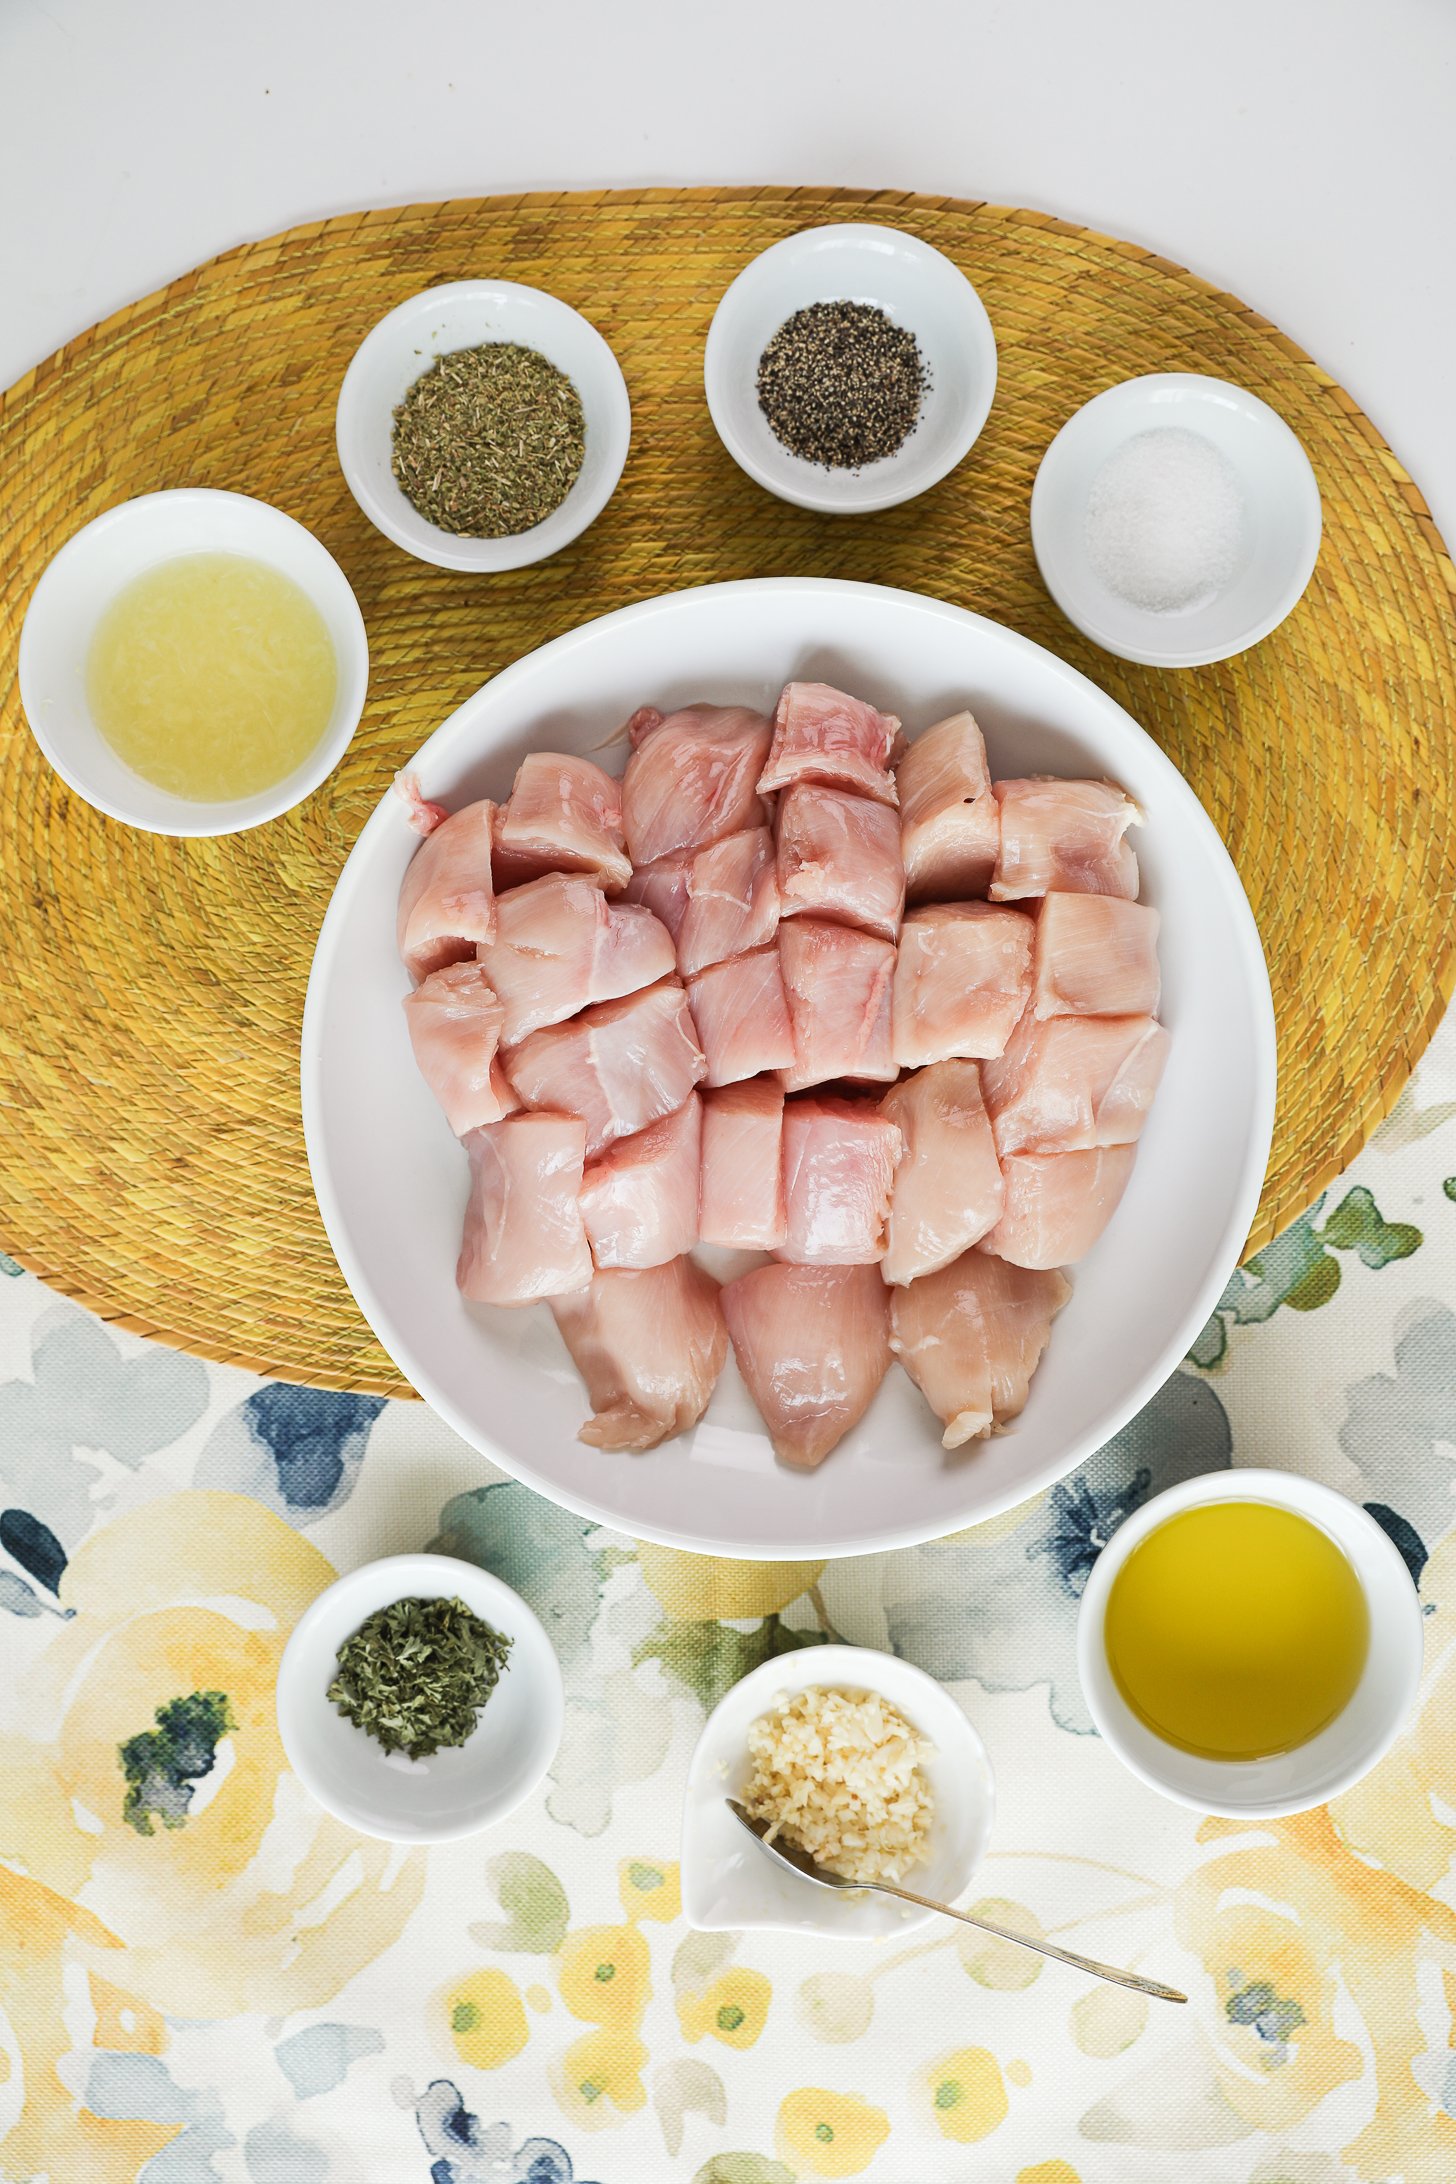 A selection of food ingredients including a bowl of raw chicken breast cubes, spices, oil, lemon and crushed garlic.